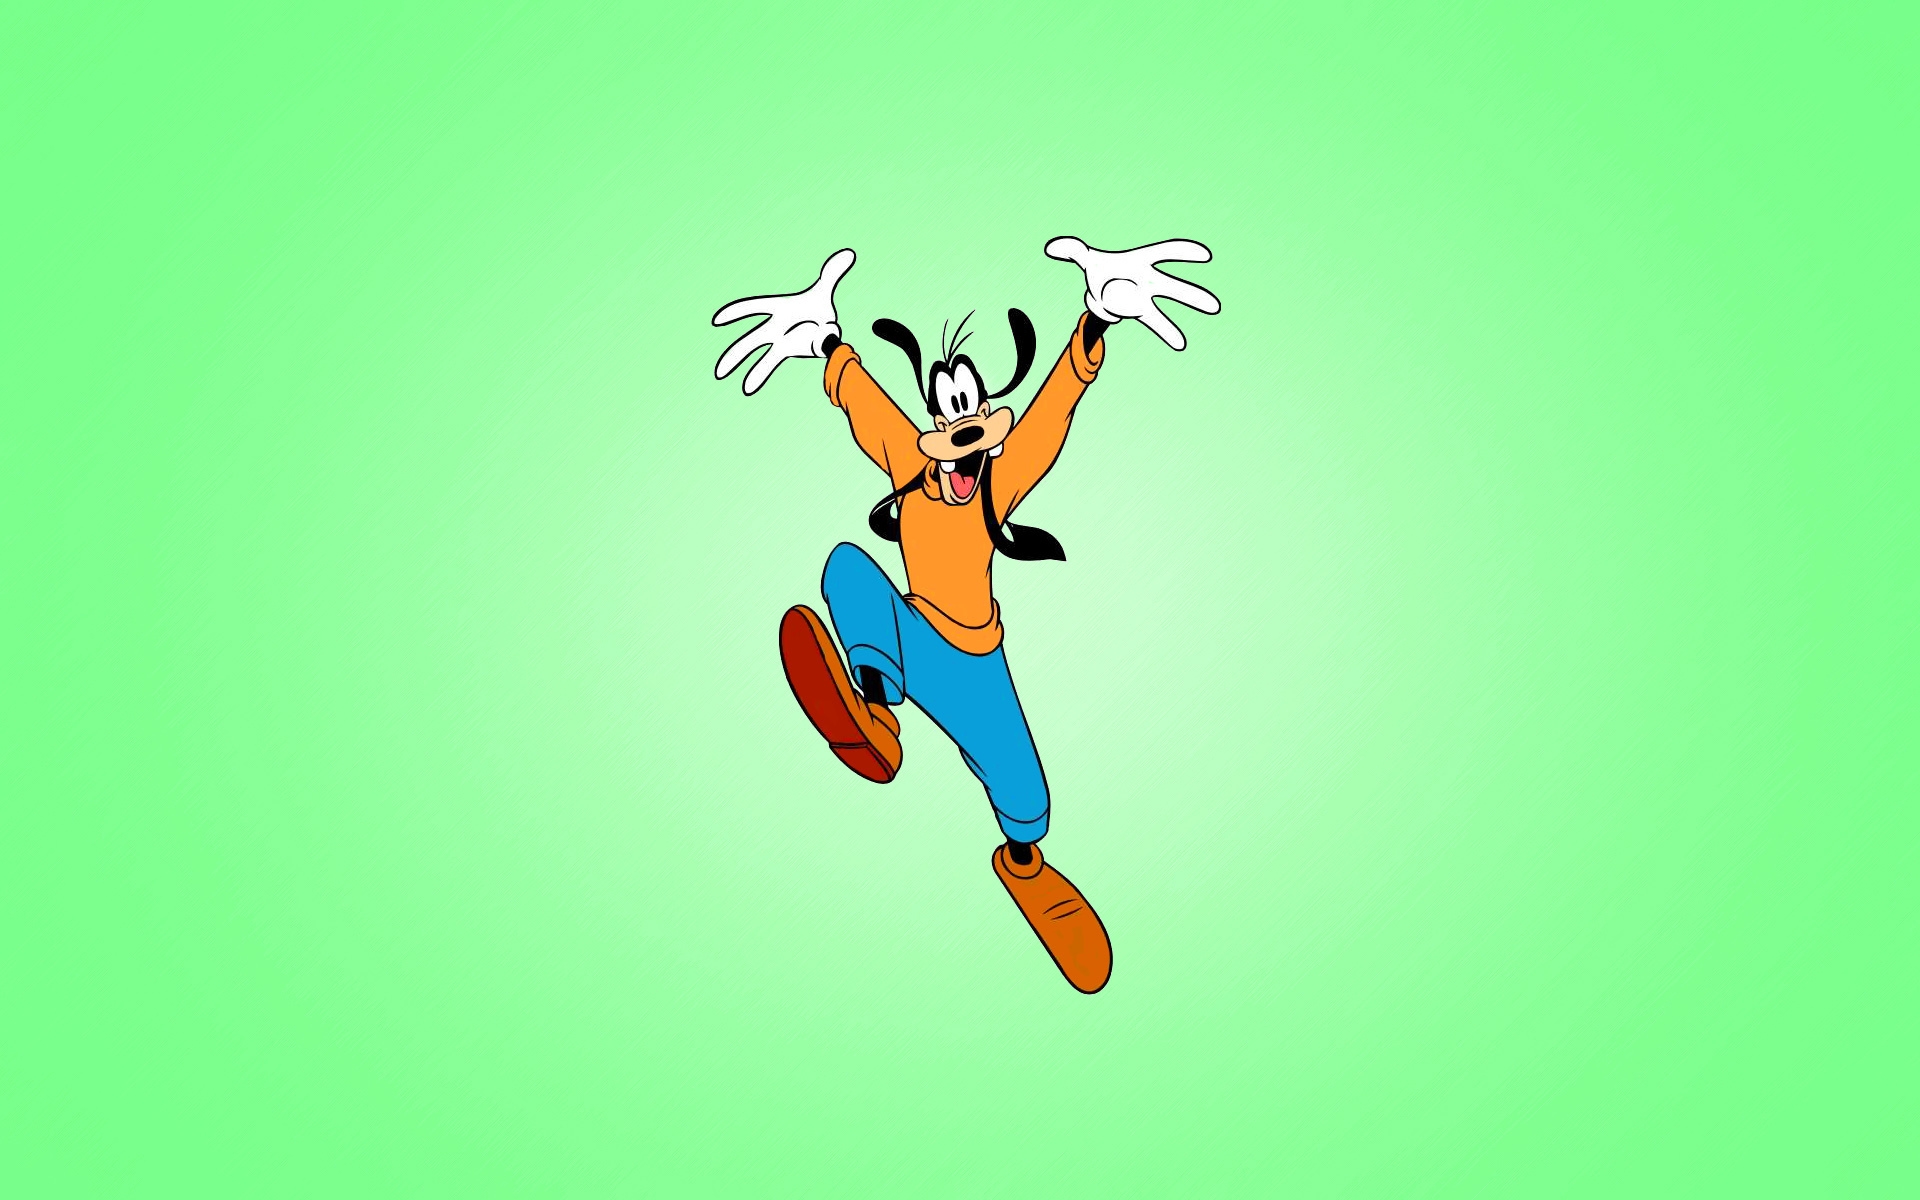 Goofy Character for 1920 x 1200 widescreen resolution